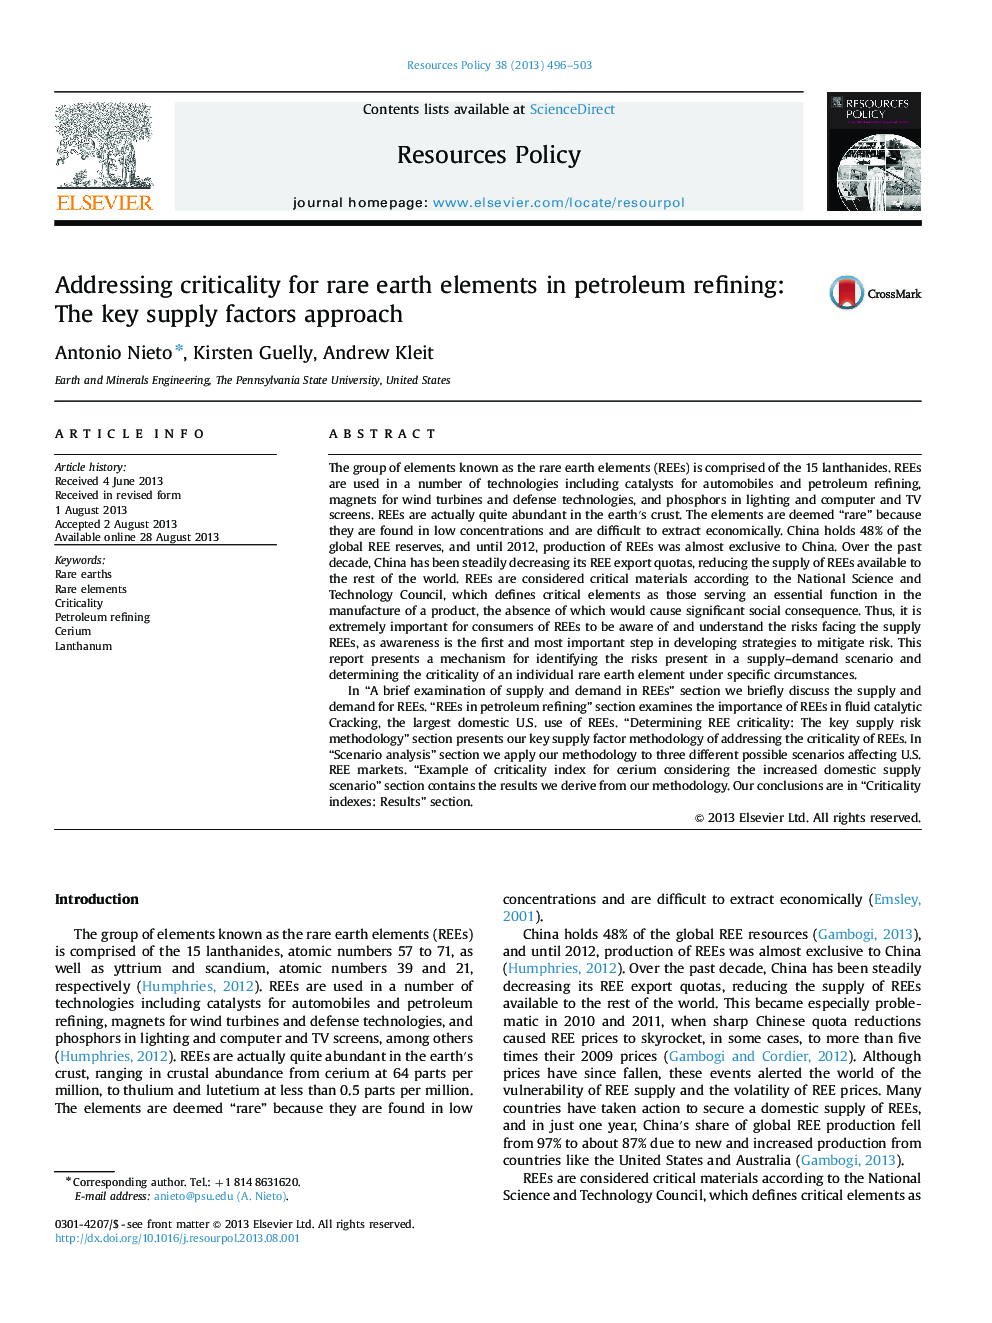 Addressing criticality for rare earth elements in petroleum refining: The key supply factors approach